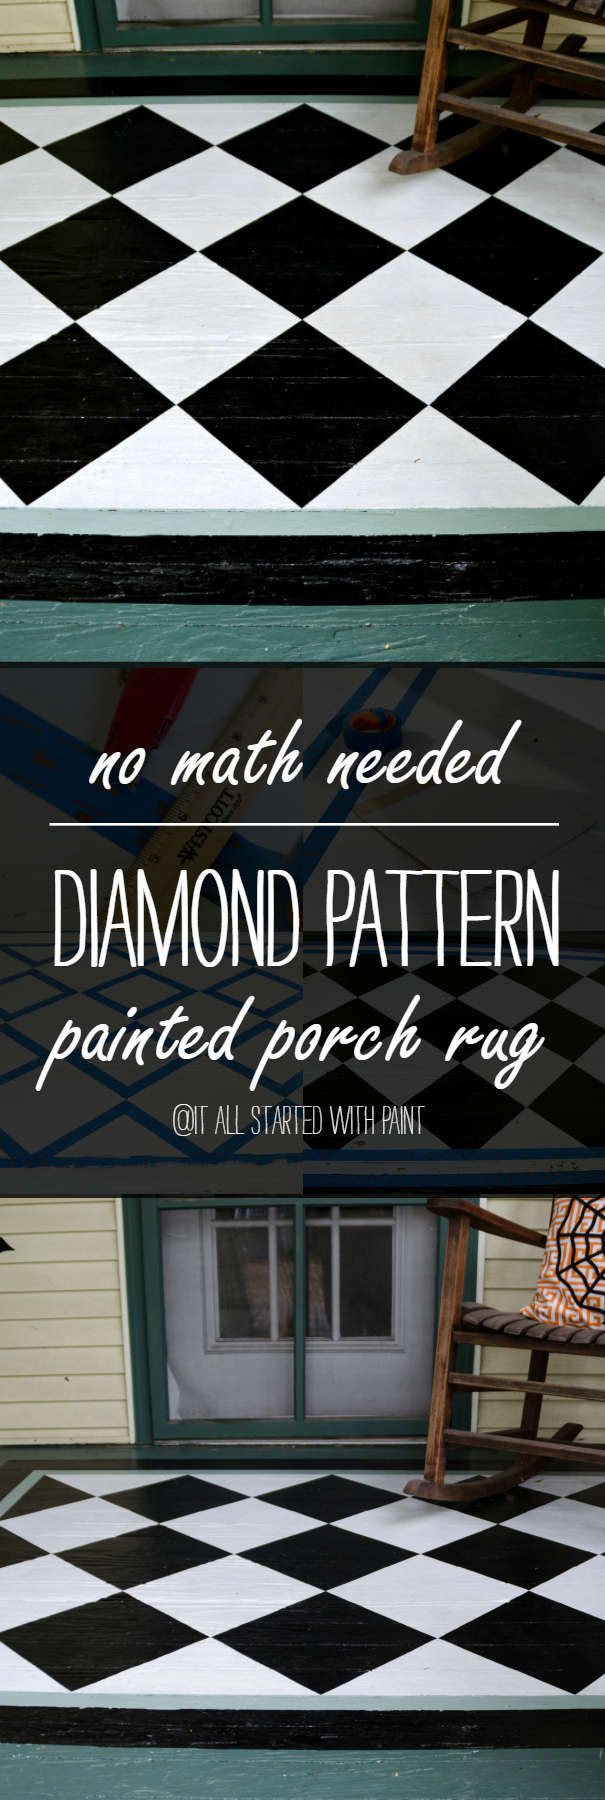 Painted Porch Rug - Diamond Pattern - Easiest Tutorial How To Paint with No Math Needed